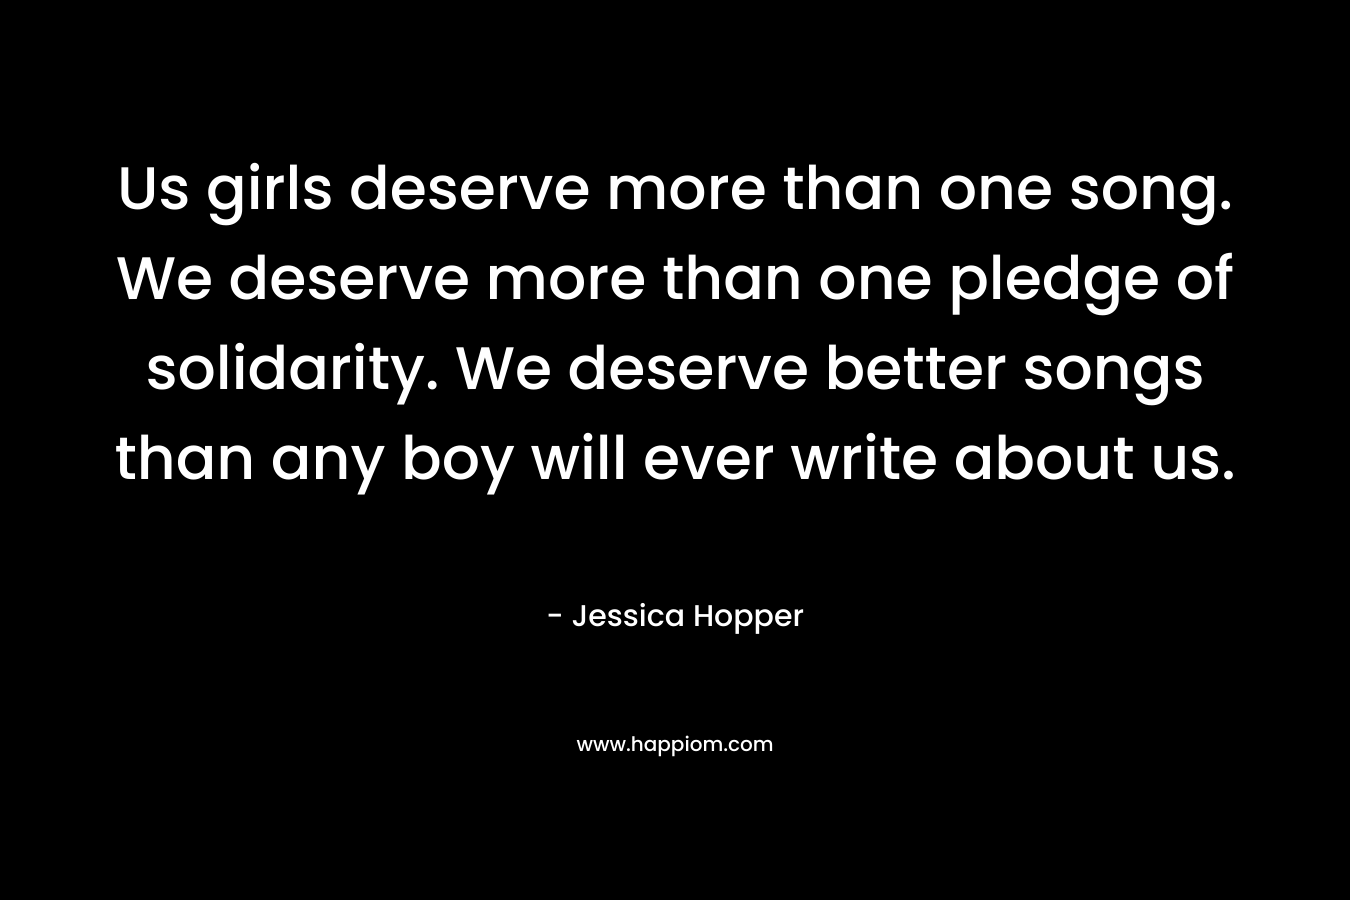 Us girls deserve more than one song. We deserve more than one pledge of solidarity. We deserve better songs than any boy will ever write about us. – Jessica Hopper